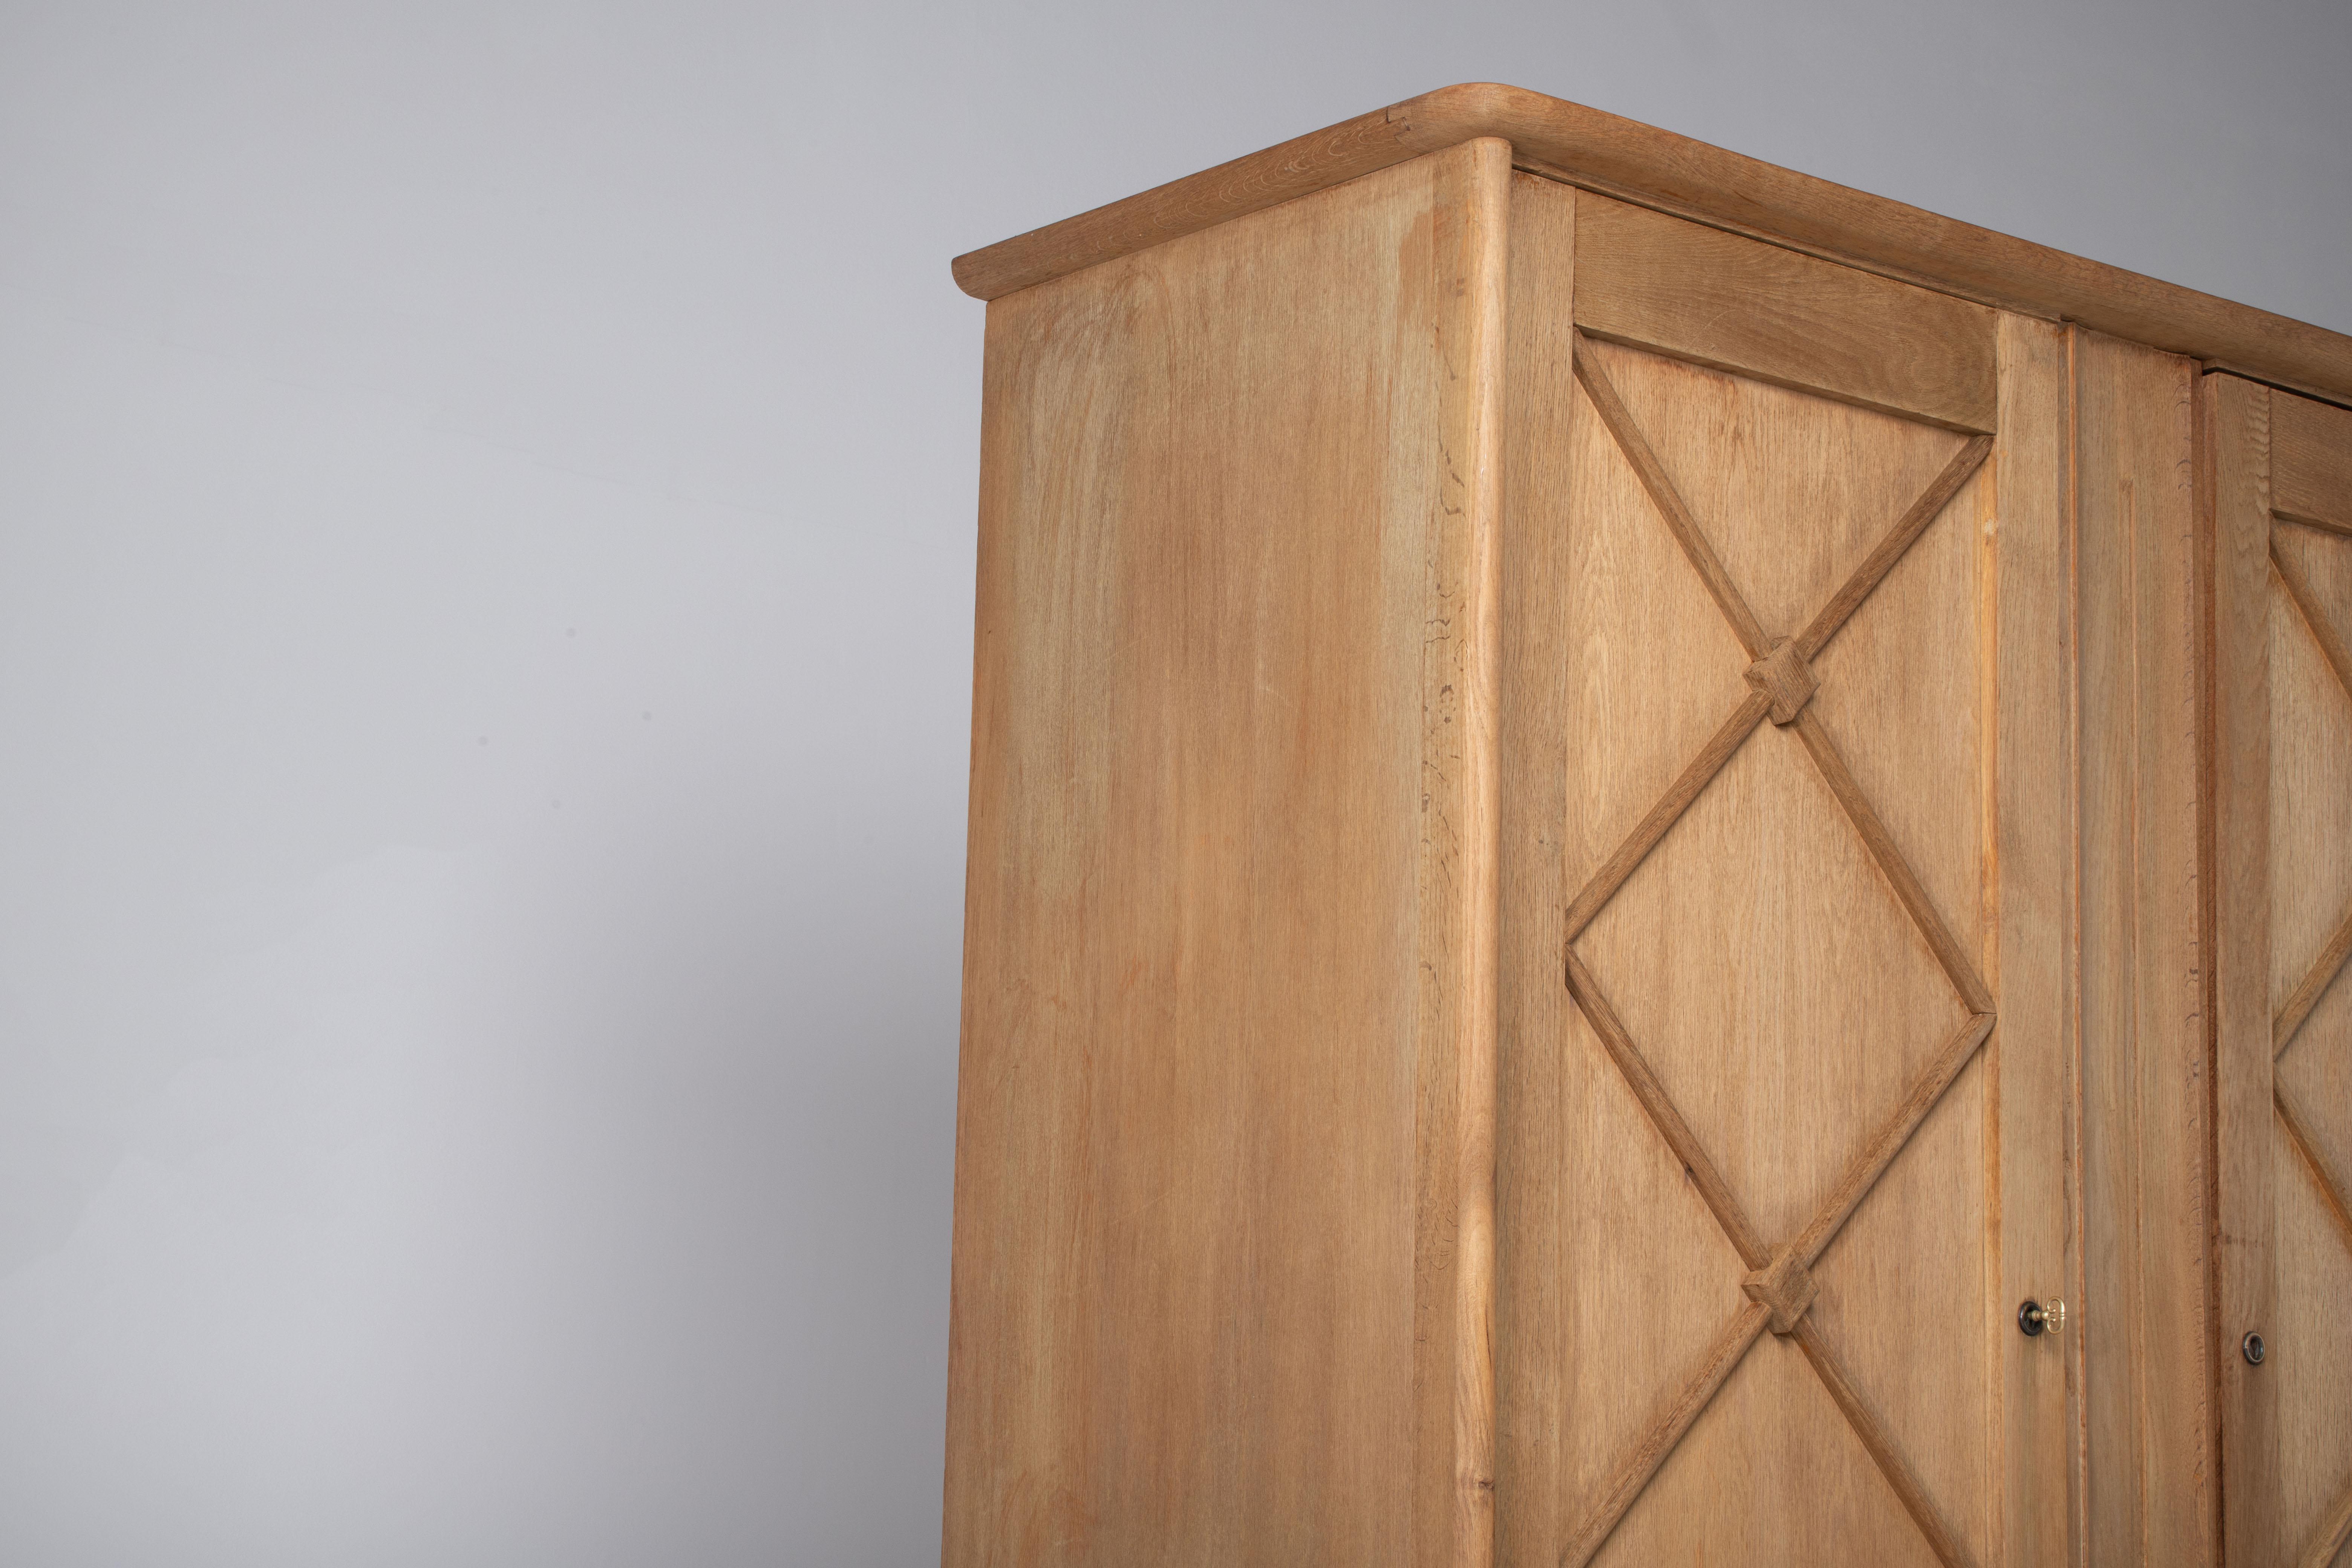 Beautiful oak vintage wardrobe made in the 1960s reminiscent of the work of Jean Royere. It has a double opening doors to hanging space with geometrical patterned doors. A great vintage piece in good condition which would bring a huge touch of style